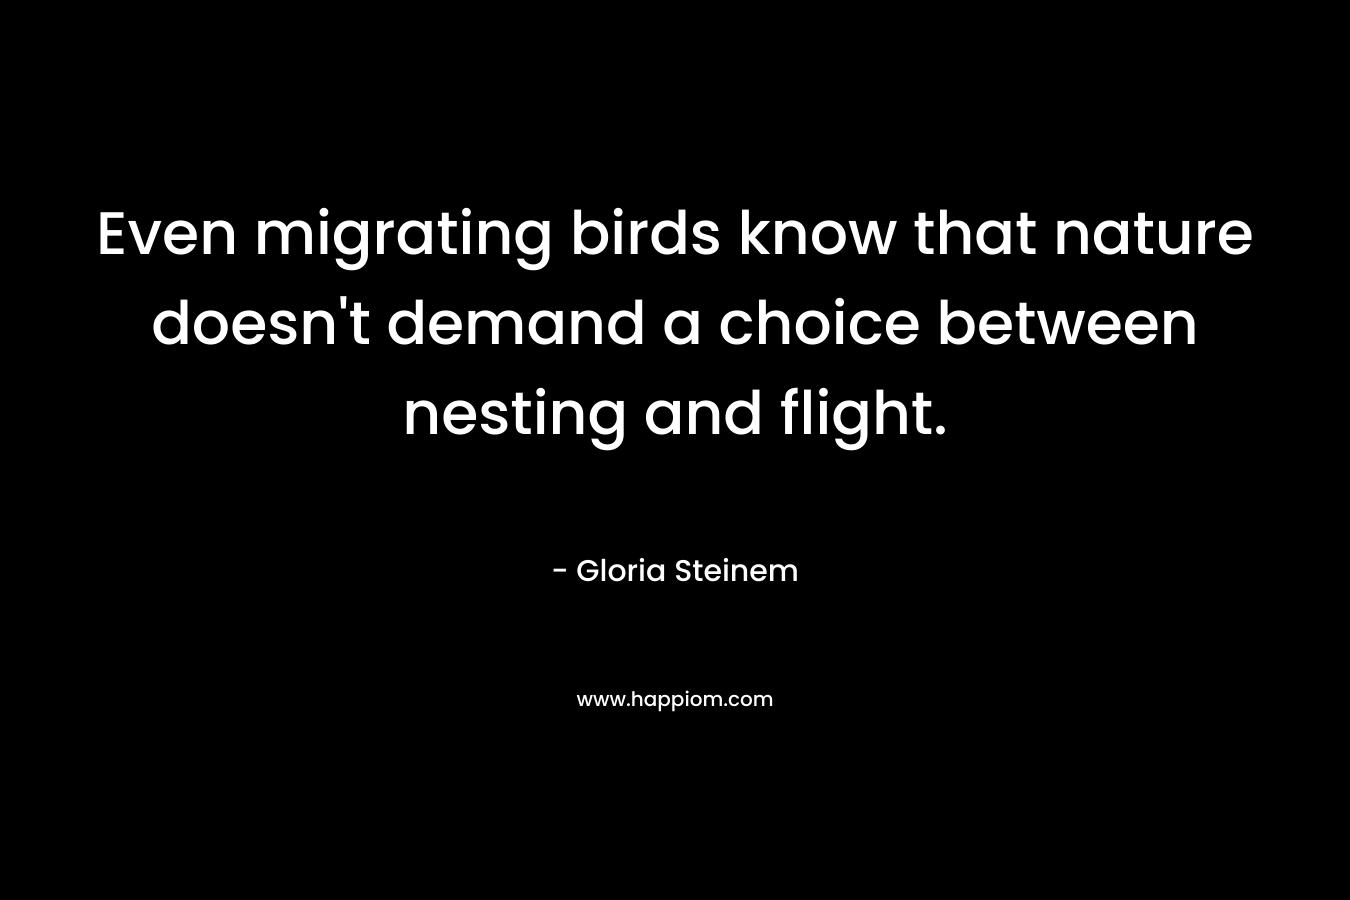 Even migrating birds know that nature doesn't demand a choice between nesting and flight.